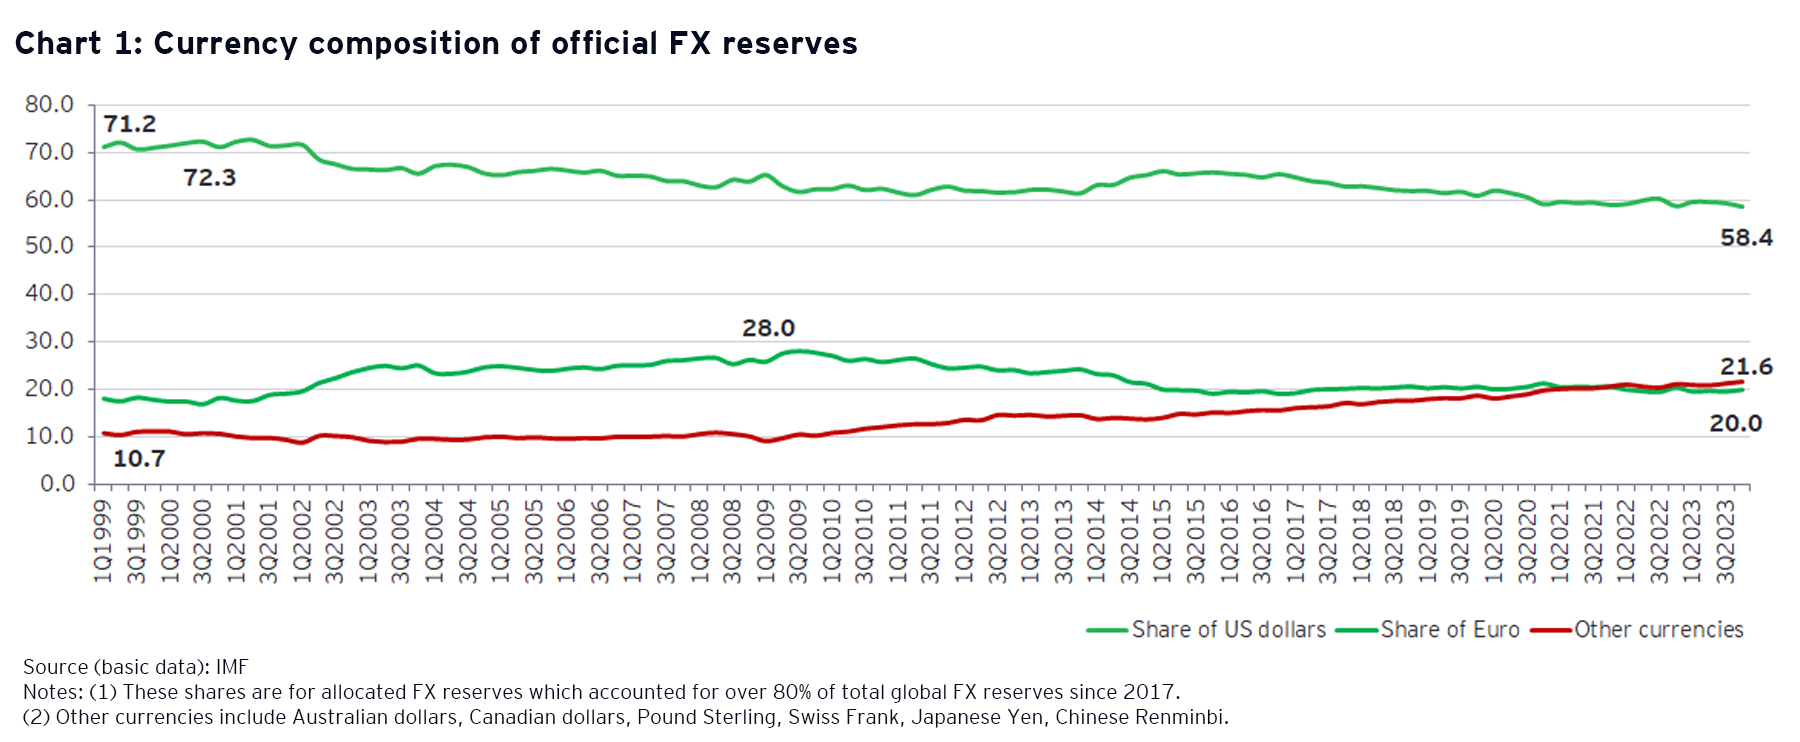 Currency composition of official FX reserves